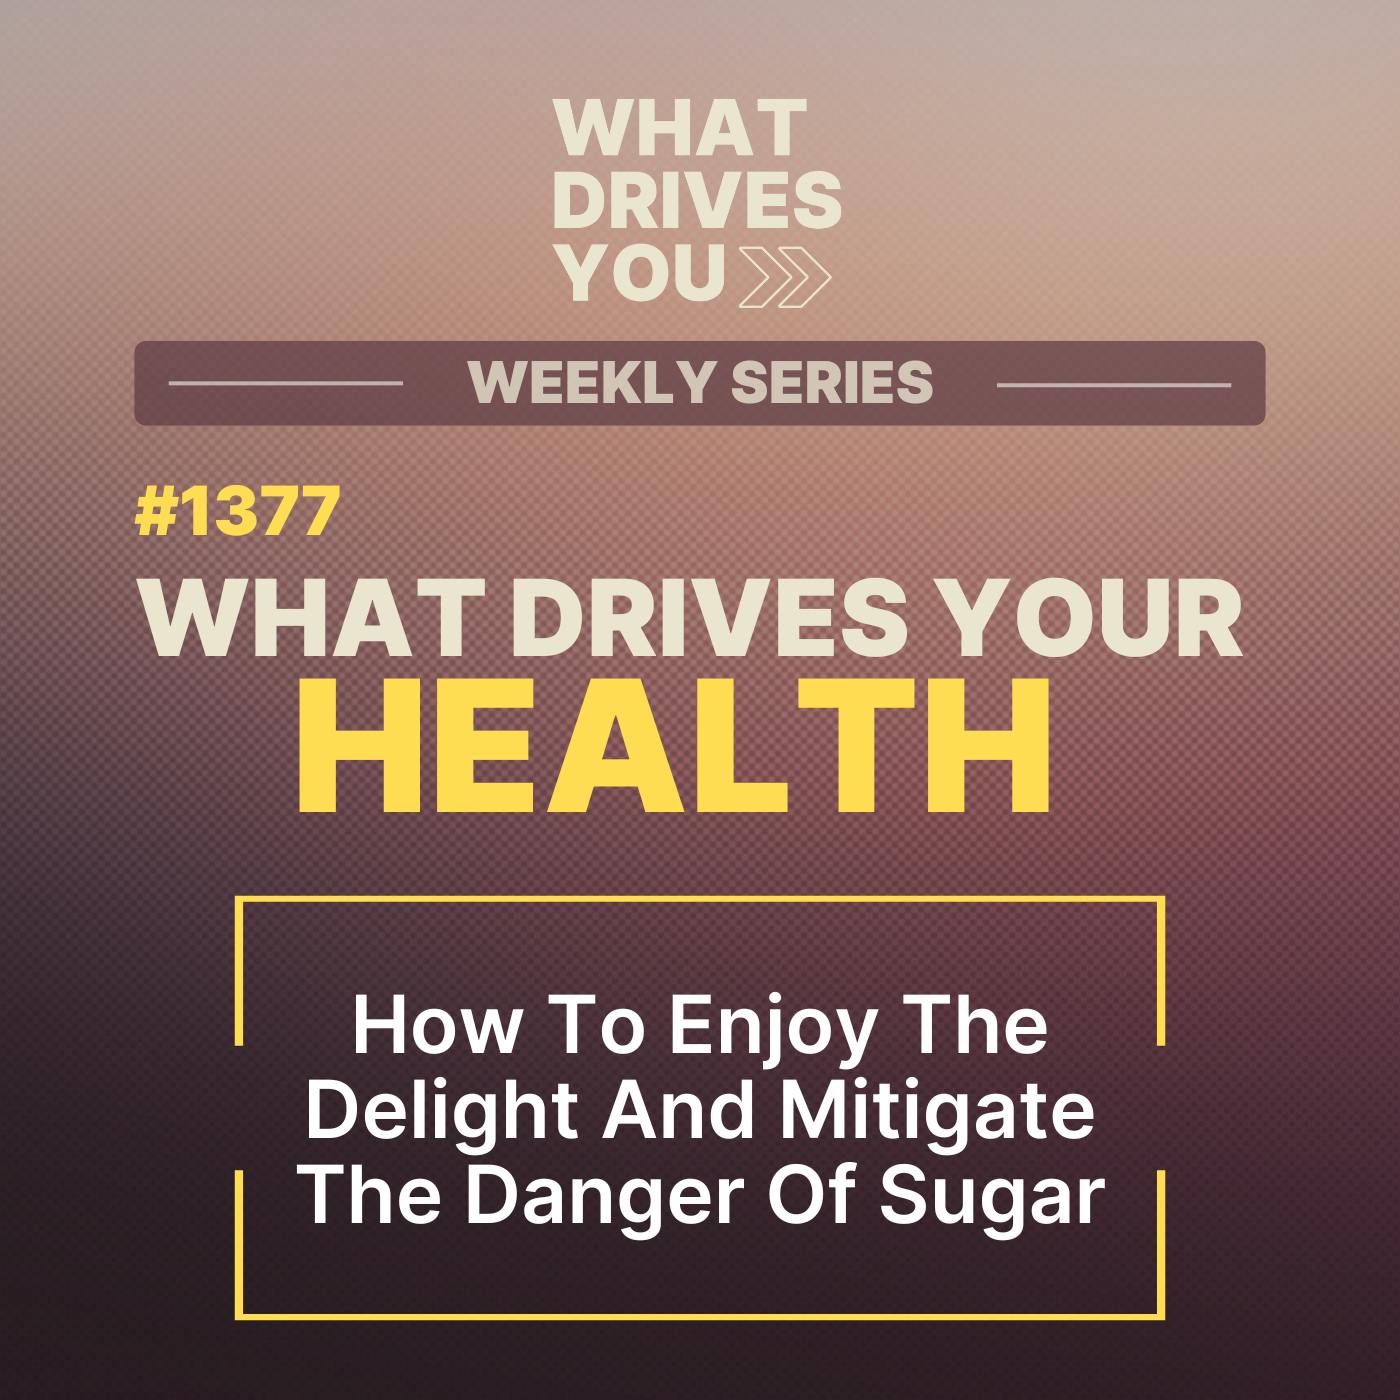 How To Enjoy The Delight And Mitigate The Danger Of Sugar